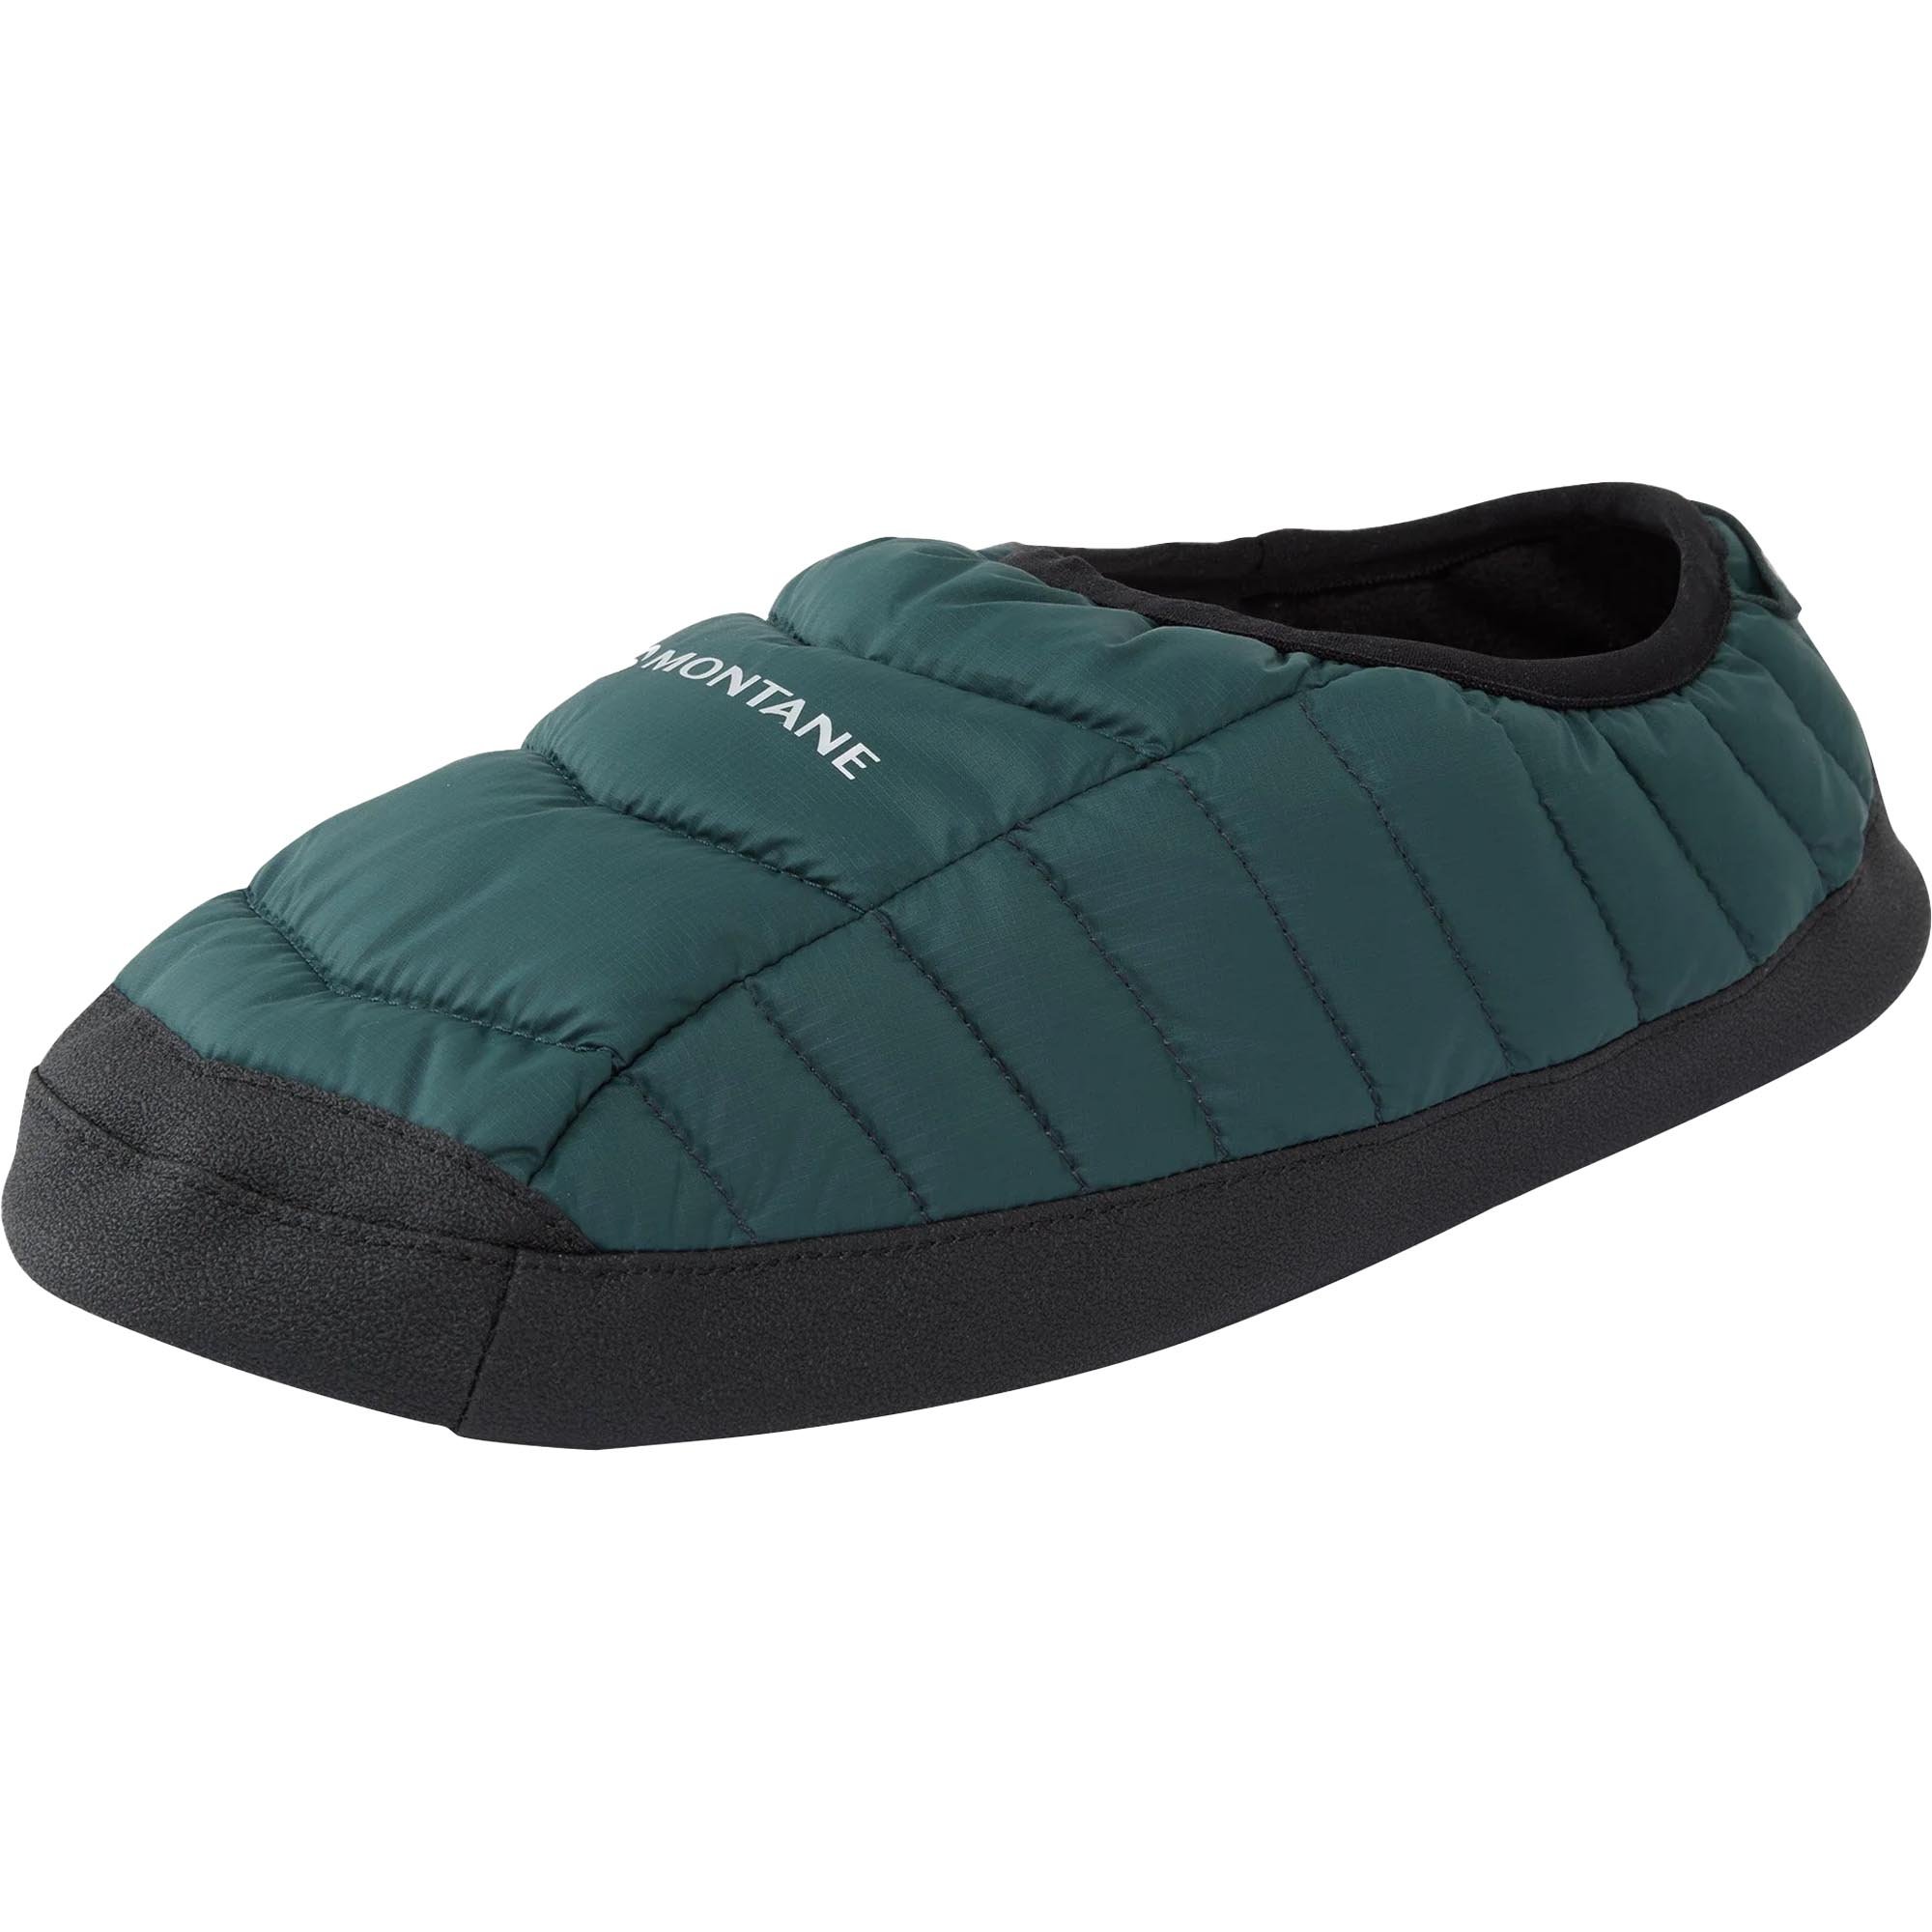 Montane Icarus Hut Insulated Camping Slippers